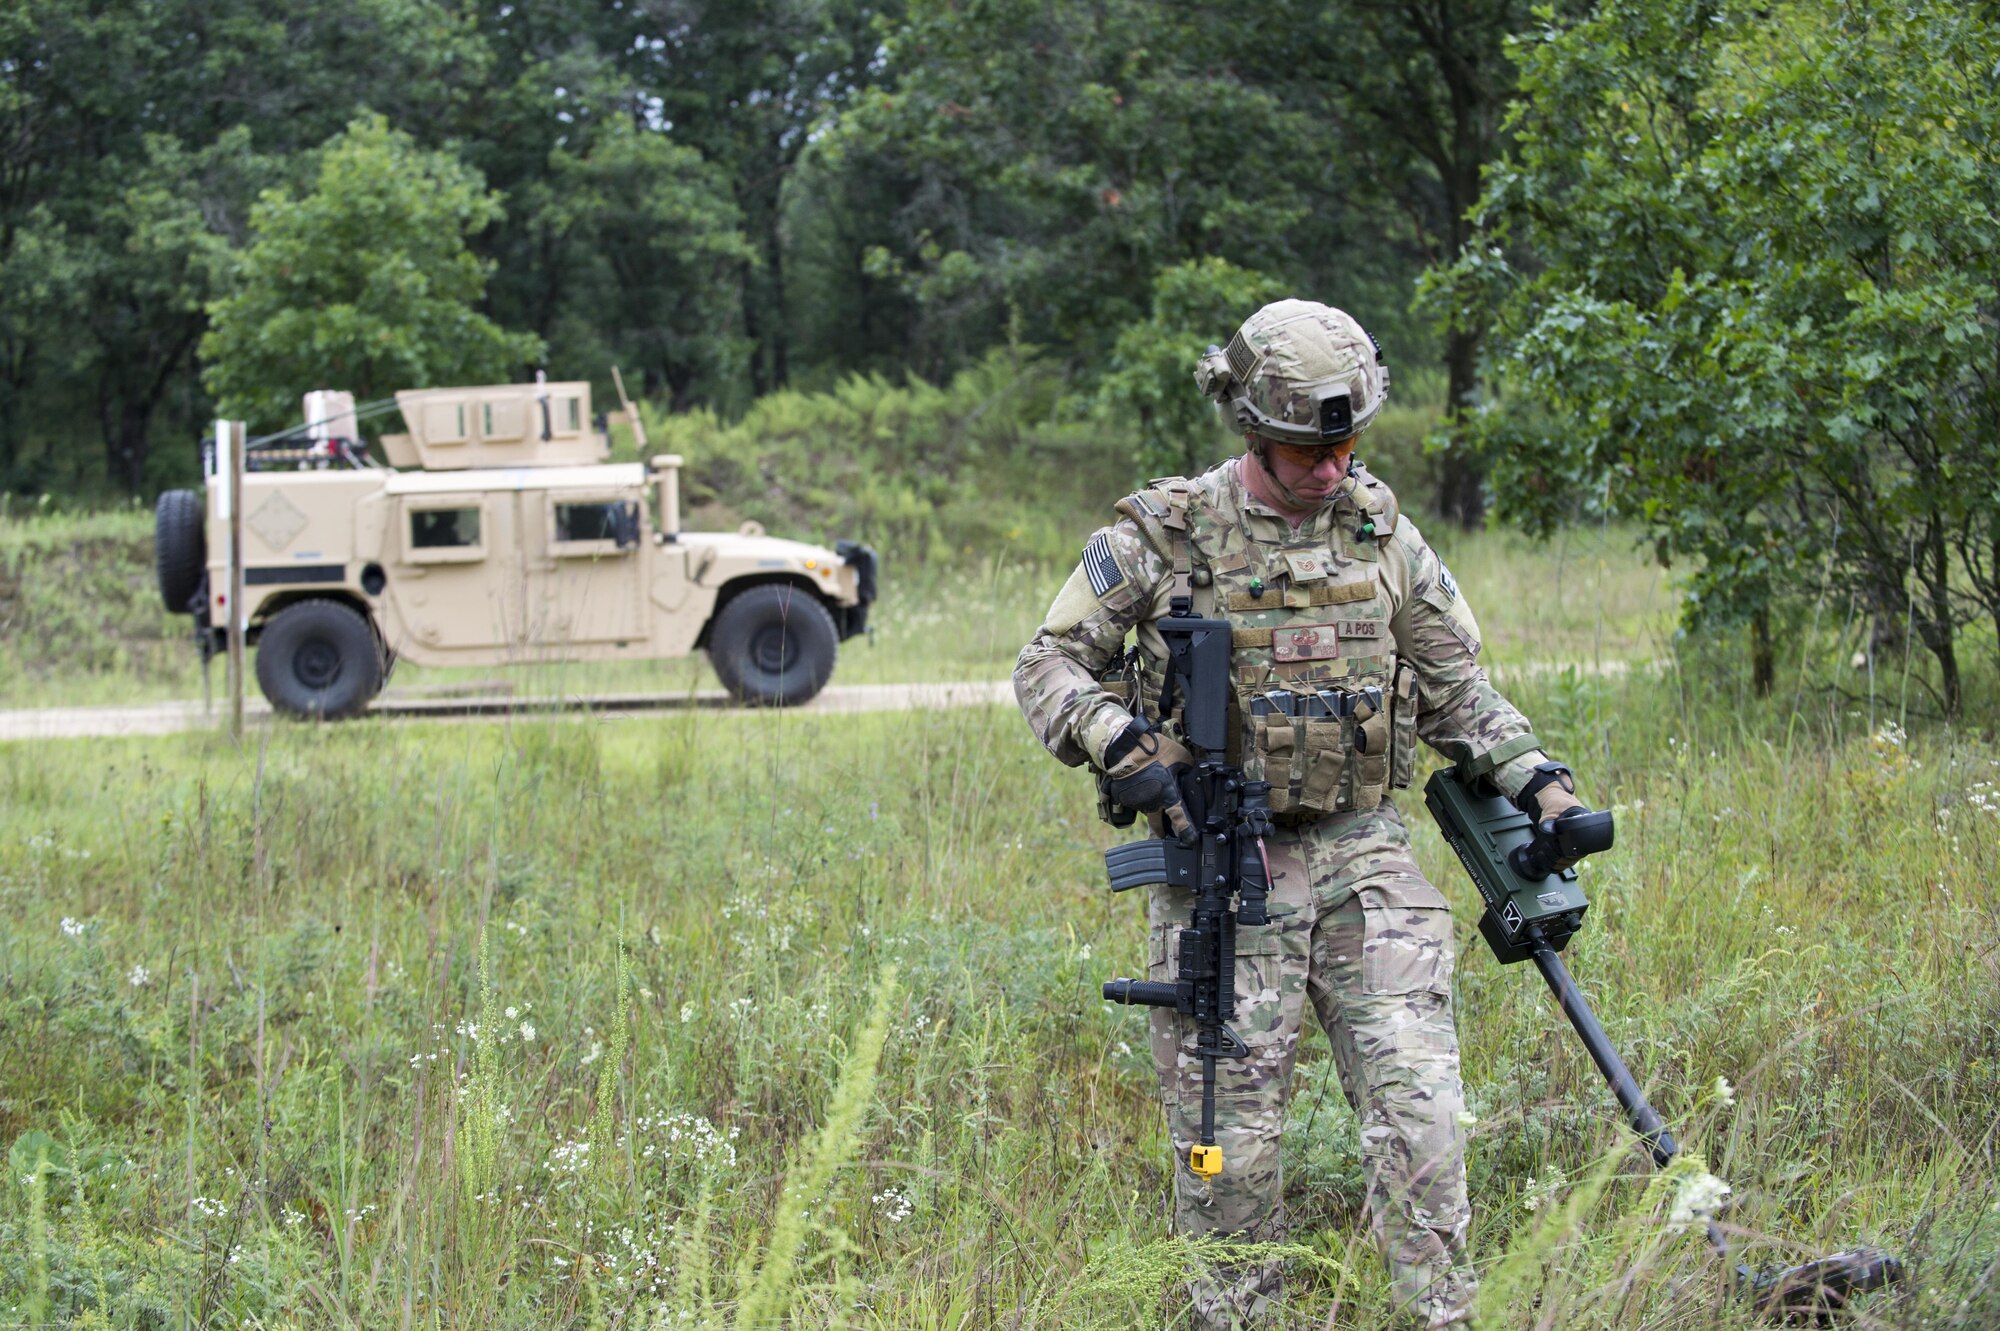 Tech Sgt. John Nelson, 512th Civil Engineer Squadron explosive ordinance disposal technician, clears a path to create a detonation site using a Minehound dual-sensor-metal detector during exercise Patriot Warrior Aug. 17, 2016, Fort. McCoy, Wis. Air Force EOD technicians work together during Patriot Warrior to expand their skills and learn from other professionals in their career field during the deployment training exercise. (U.S. Air Force Photo/ Tech. Sgt. Nathan Rivard)